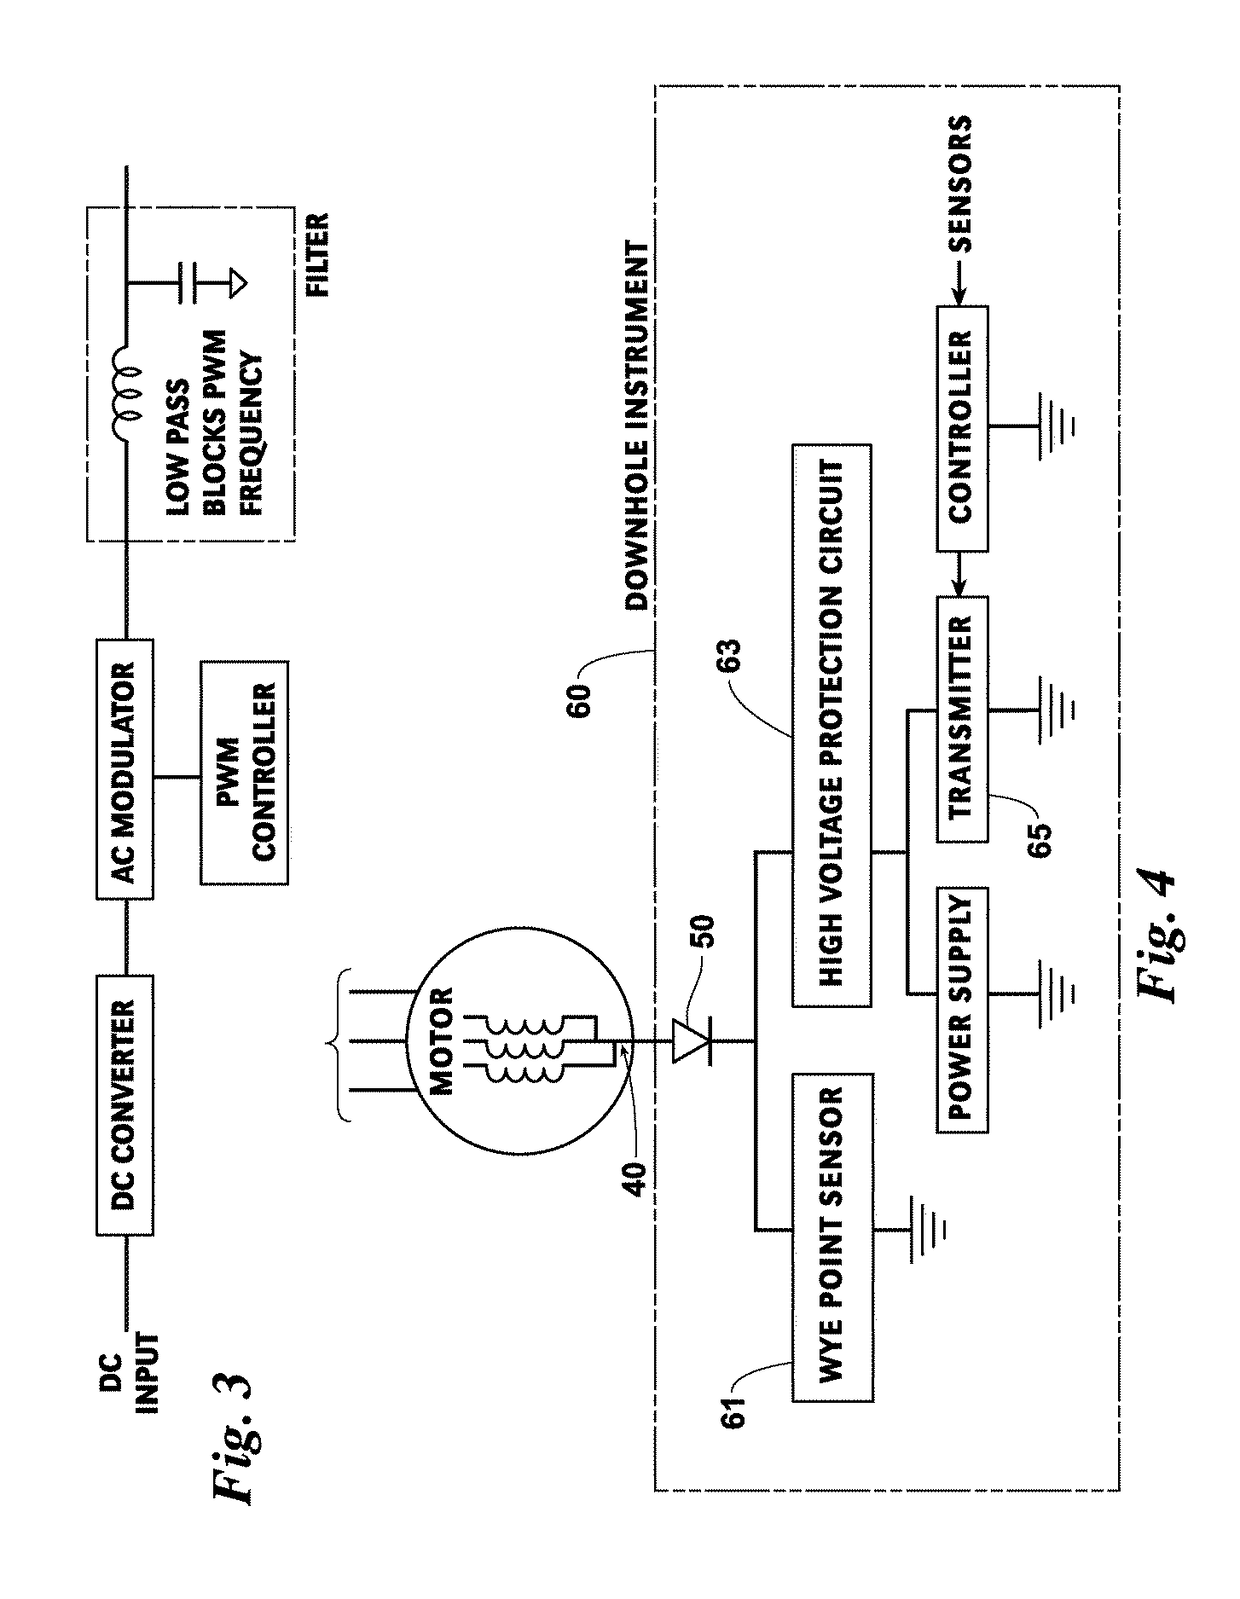 Ground fault tolerant data communication system for a downhole instrument